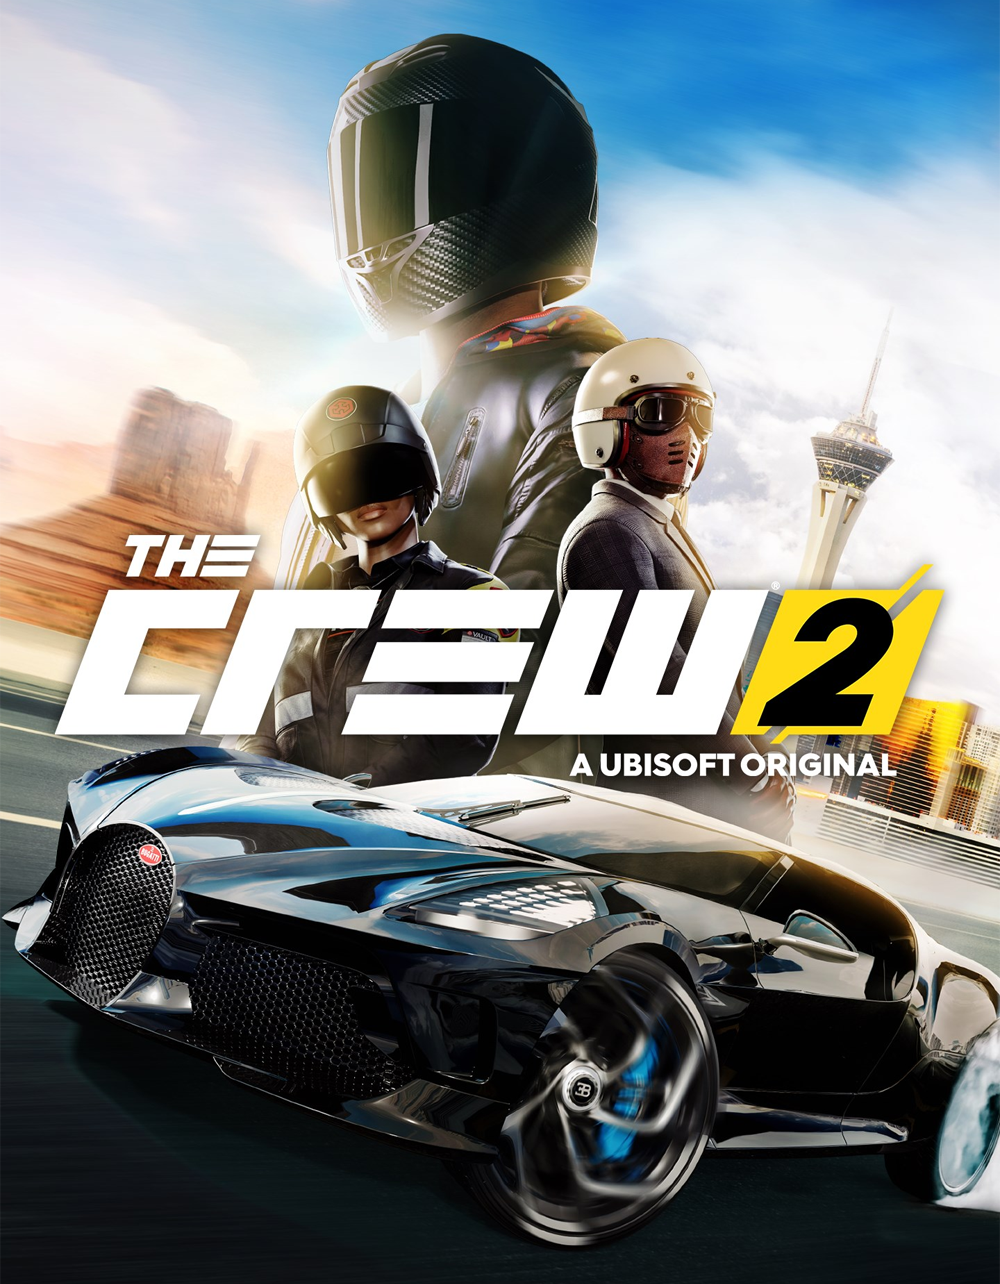 THE CREW Wiki